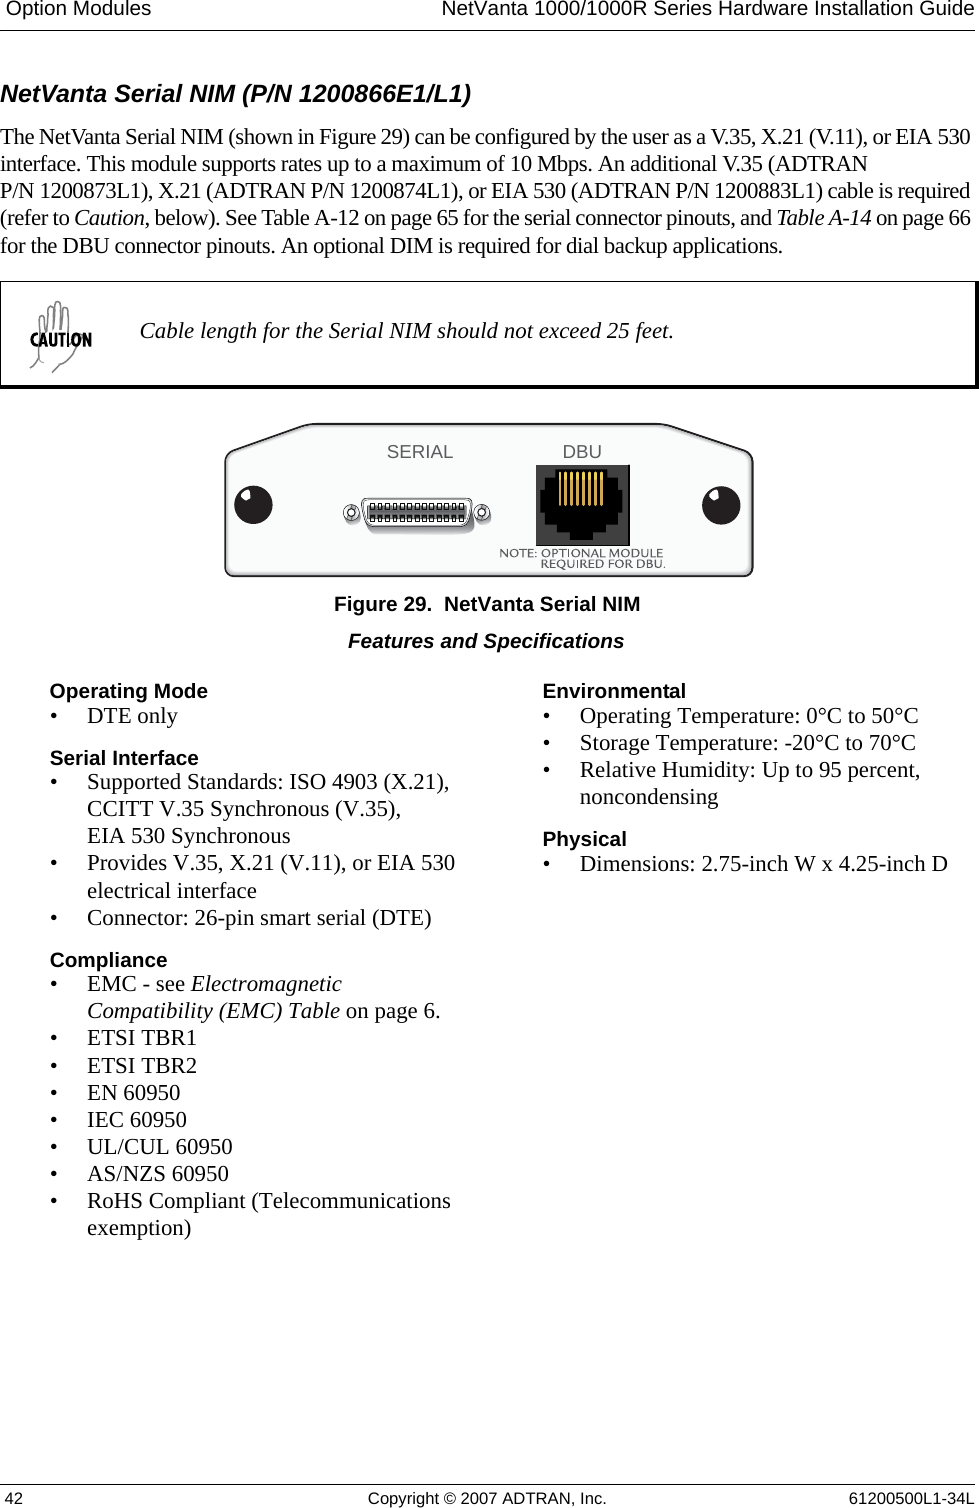  Option Modules NetVanta 1000/1000R Series Hardware Installation Guide 42 Copyright © 2007 ADTRAN, Inc. 61200500L1-34LNetVanta Serial NIM (P/N 1200866E1/L1)The NetVanta Serial NIM (shown in Figure 29) can be configured by the user as a V.35, X.21 (V.11), or EIA 530 interface. This module supports rates up to a maximum of 10 Mbps. An additional V.35 (ADTRAN P/N 1200873L1), X.21 (ADTRAN P/N 1200874L1), or EIA 530 (ADTRAN P/N 1200883L1) cable is required (refer to Caution, below). See Table A-12 on page 65 for the serial connector pinouts, and Table A-14 on page 66 for the DBU connector pinouts. An optional DIM is required for dial backup applications.Figure 29.  NetVanta Serial NIMCable length for the Serial NIM should not exceed 25 feet.SERIAL DBUFeatures and SpecificationsOperating Mode• DTE onlySerial Interface• Supported Standards: ISO 4903 (X.21), CCITT V.35 Synchronous (V.35), EIA 530 Synchronous• Provides V.35, X.21 (V.11), or EIA 530 electrical interface• Connector: 26-pin smart serial (DTE) Compliance• EMC - see Electromagnetic Compatibility (EMC) Table on page 6.• ETSI TBR1• ETSI TBR2• EN 60950• IEC 60950• UL/CUL 60950• AS/NZS 60950• RoHS Compliant (Telecommunications exemption)Environmental• Operating Temperature: 0°C to 50°C• Storage Temperature: -20°C to 70°C• Relative Humidity: Up to 95 percent, noncondensingPhysical• Dimensions: 2.75-inch W x 4.25-inch D